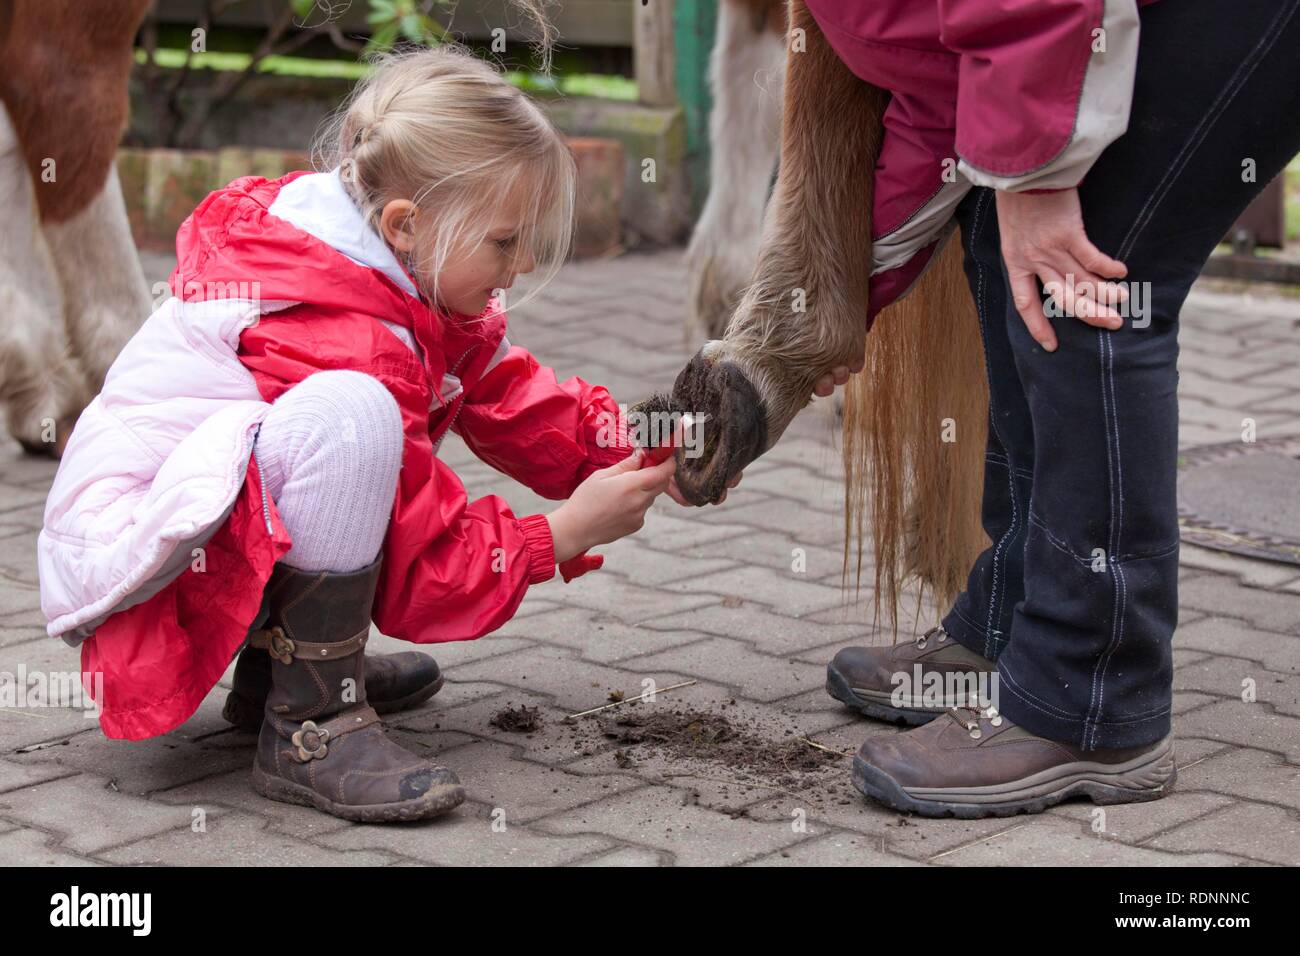 Young girl cleaning the hooves of a pony Stock Photo